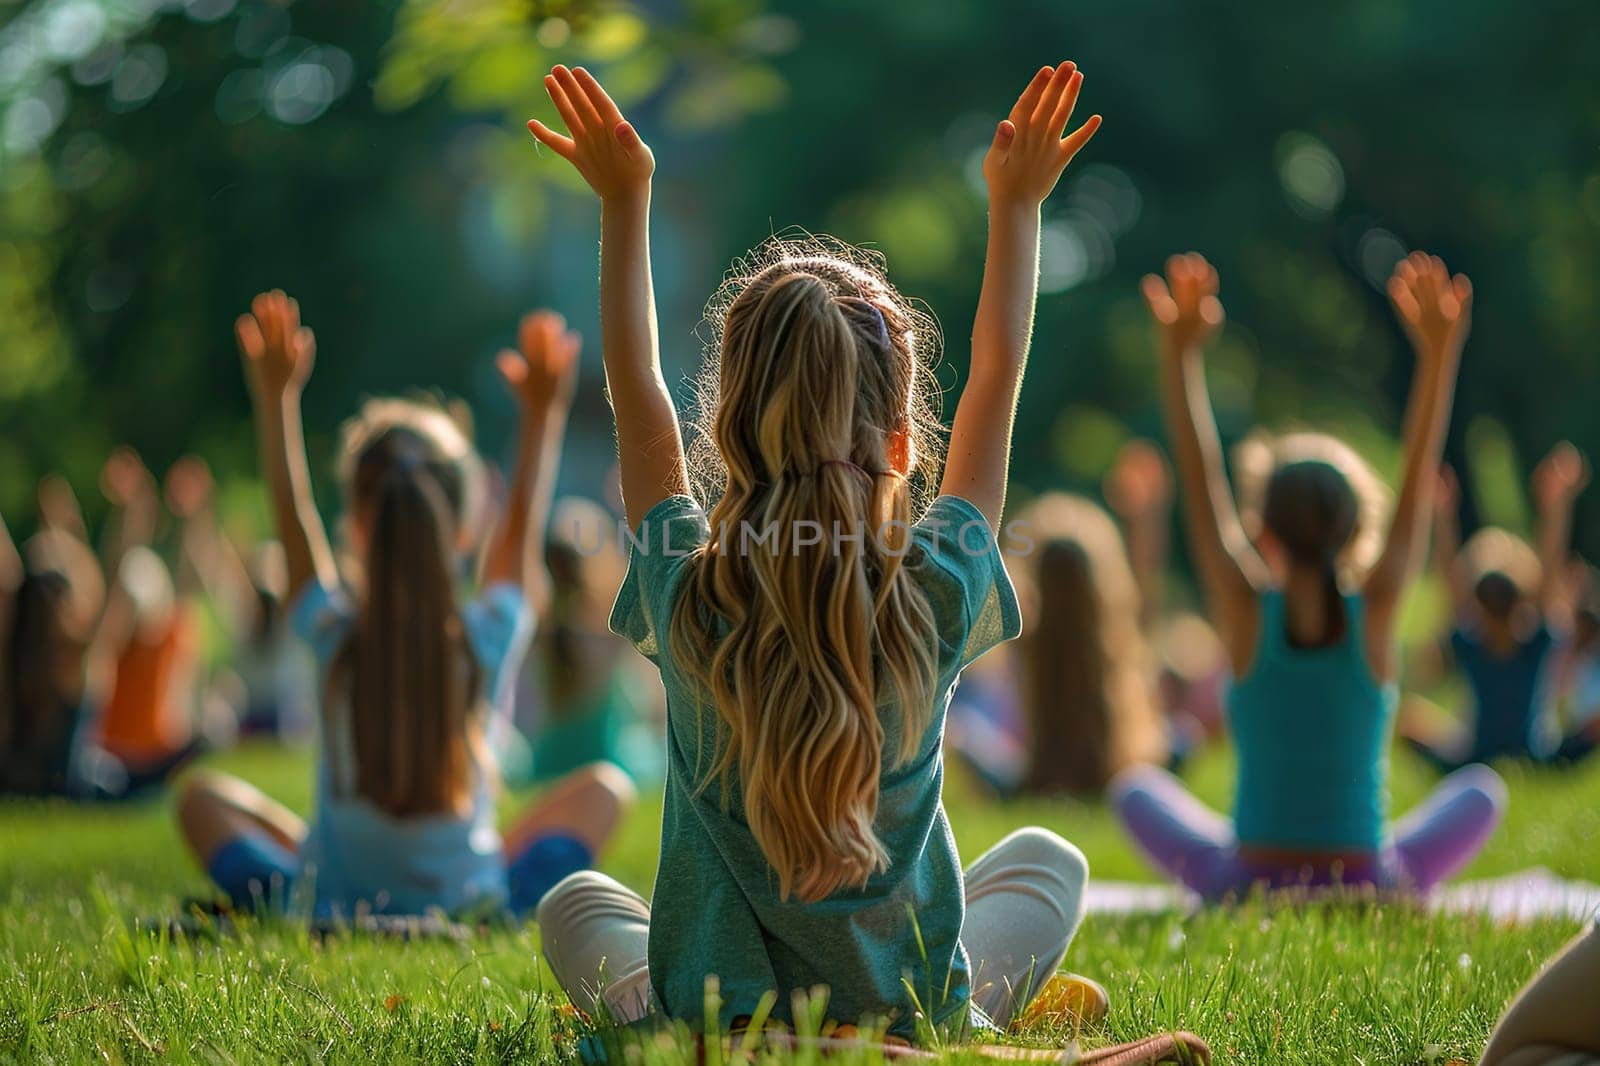 Rear view of a group of children sitting on the grass outdoors. The concept of children's gymnastics, fitness, sport.